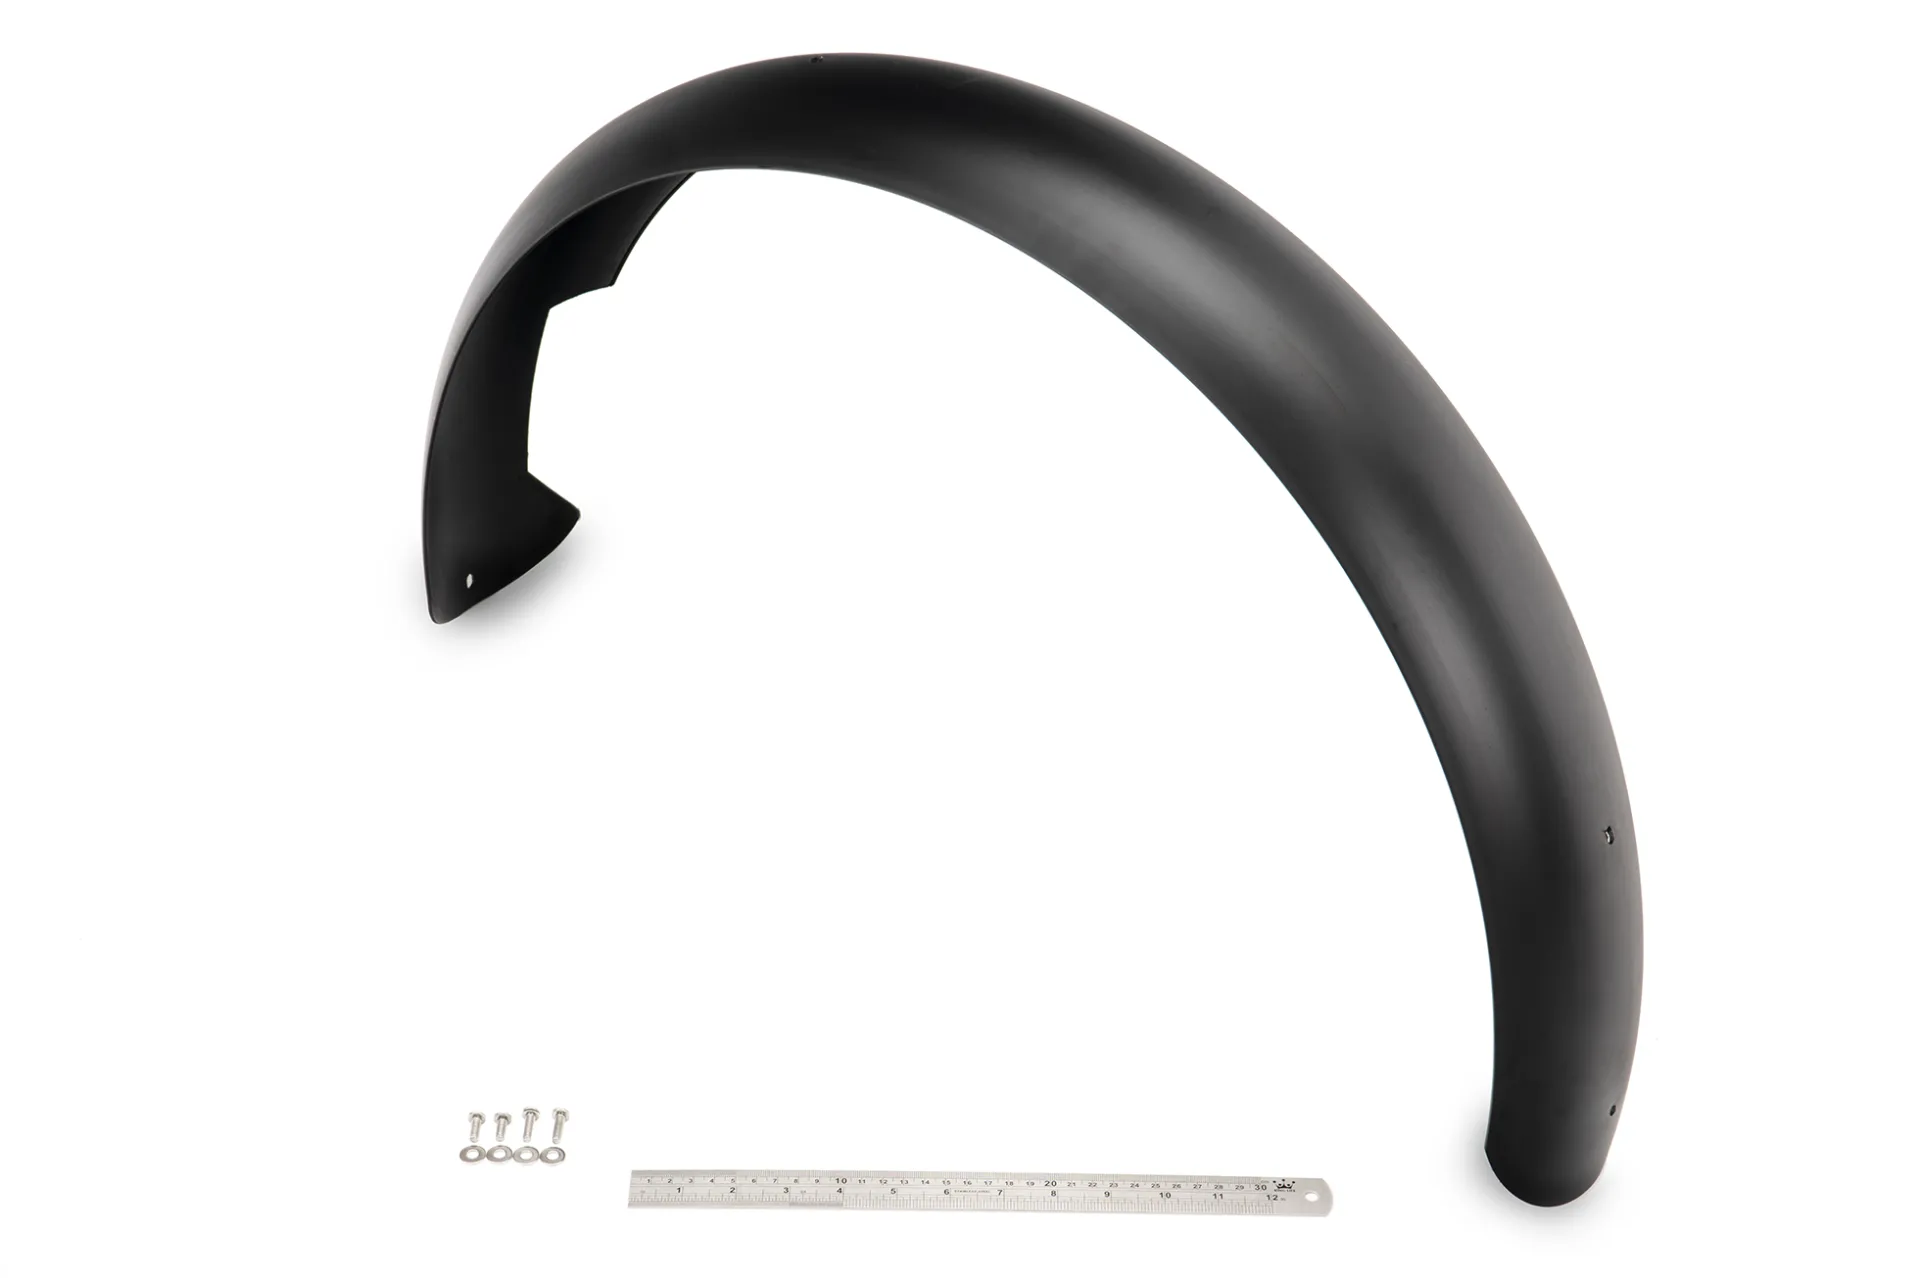 Fenders X27.5: Full-Length Mudguards for the Orox | Tern Bicycles